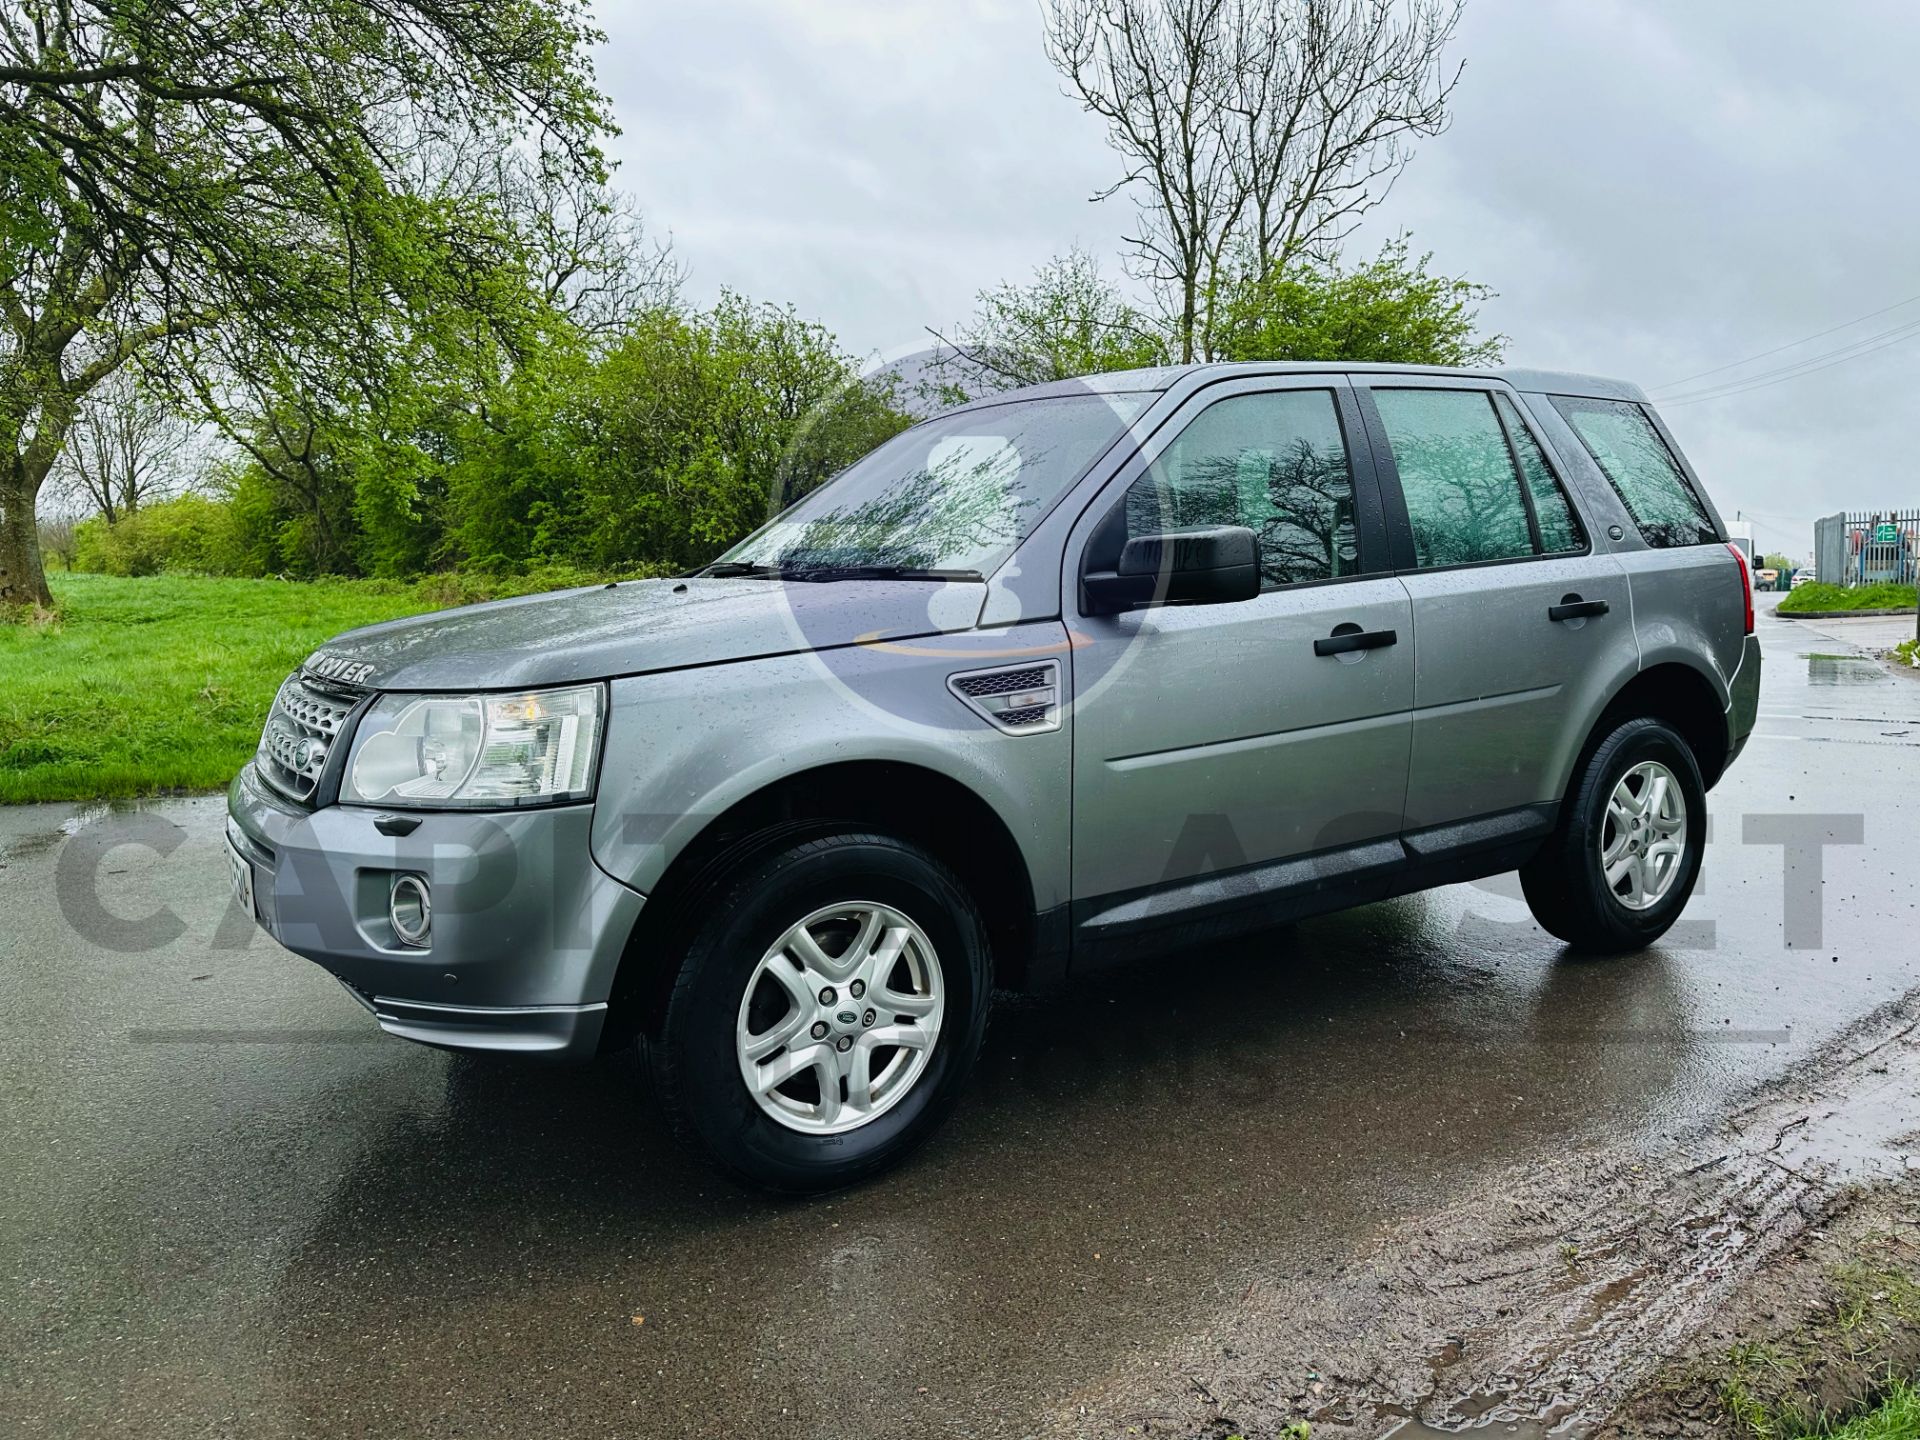 (ON SALE) LANDROVER FREELANDER 2.2TD4 S EDITION "AUTO - 2012 MODEL - AIR CON - FSH - Image 5 of 33